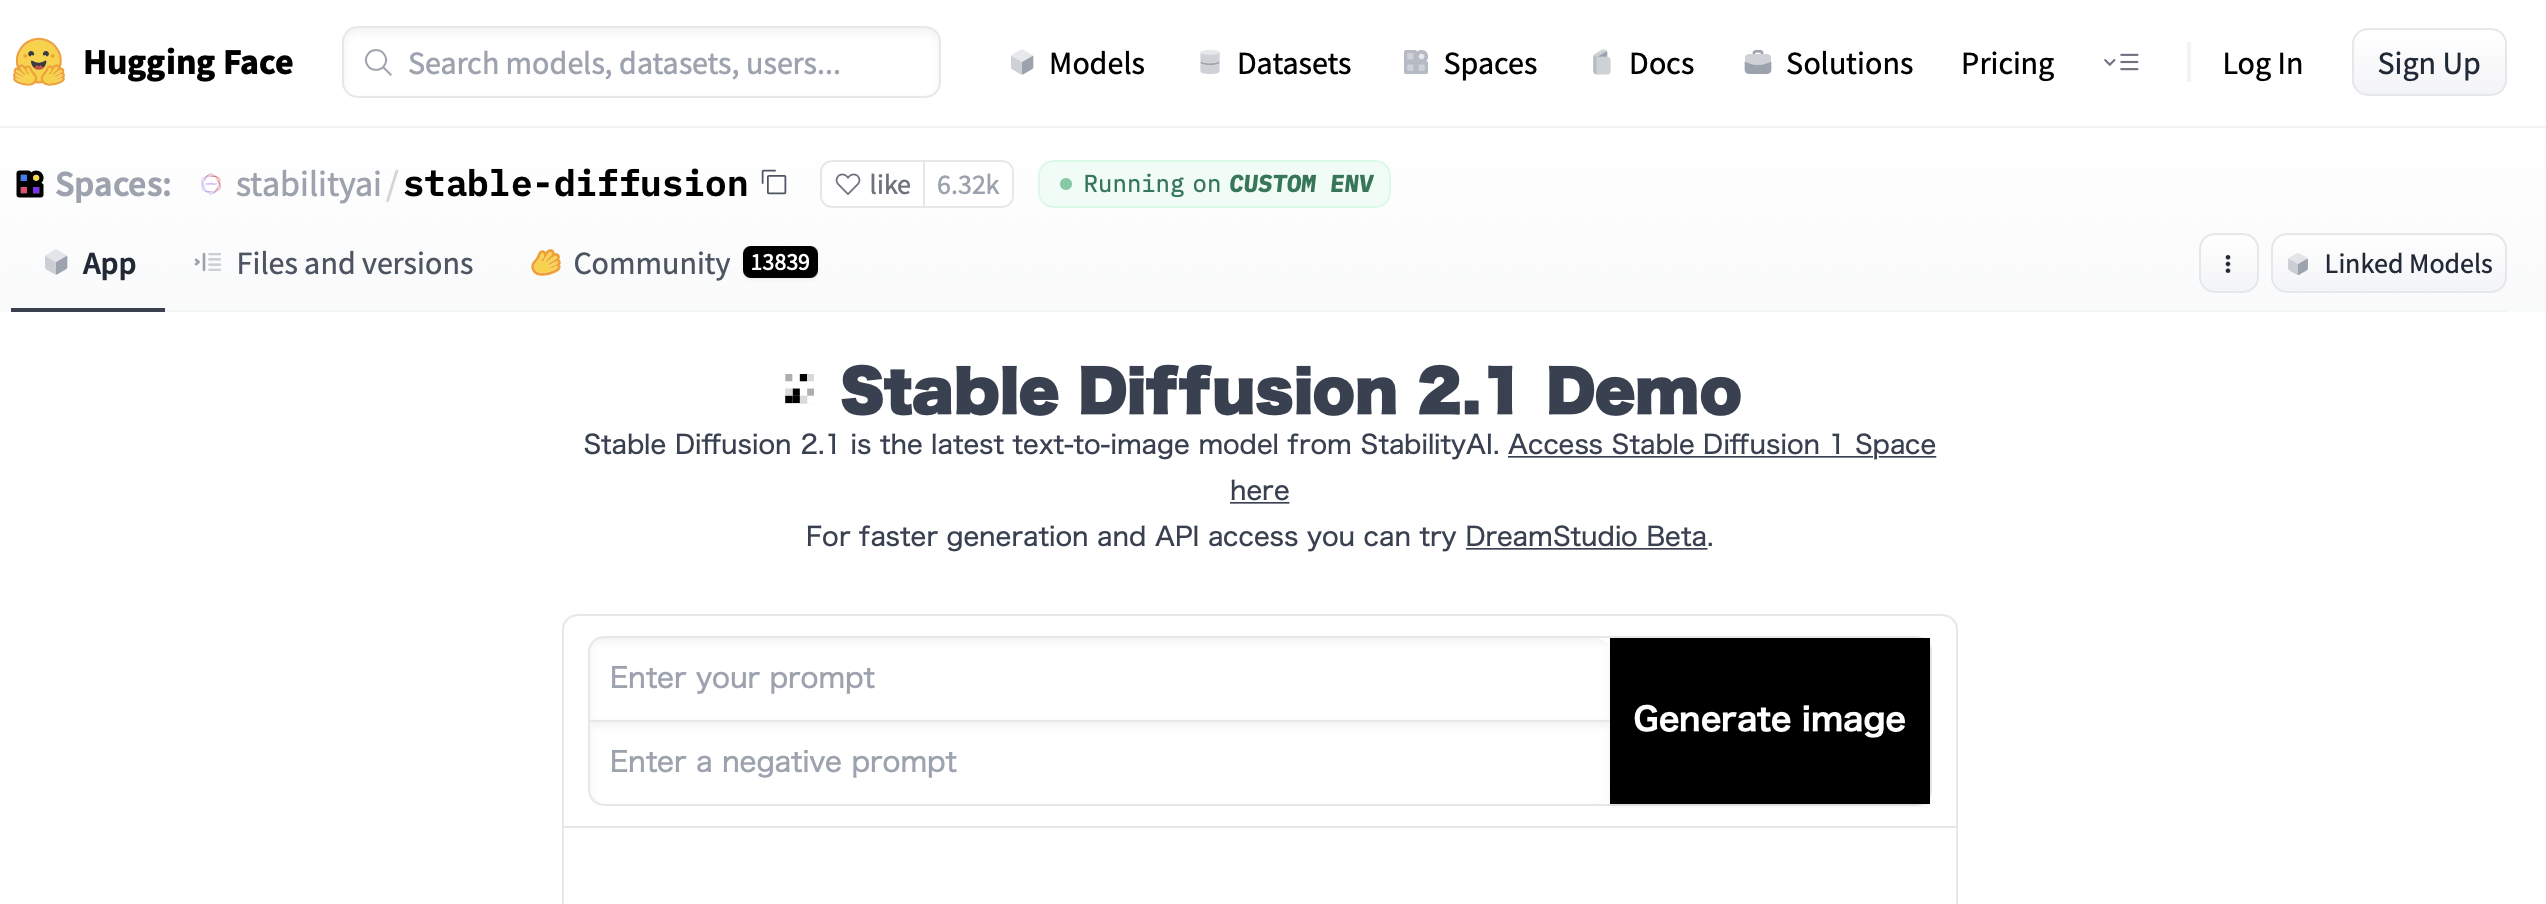 Stable Diffusion 2.1 Demo サイト画面